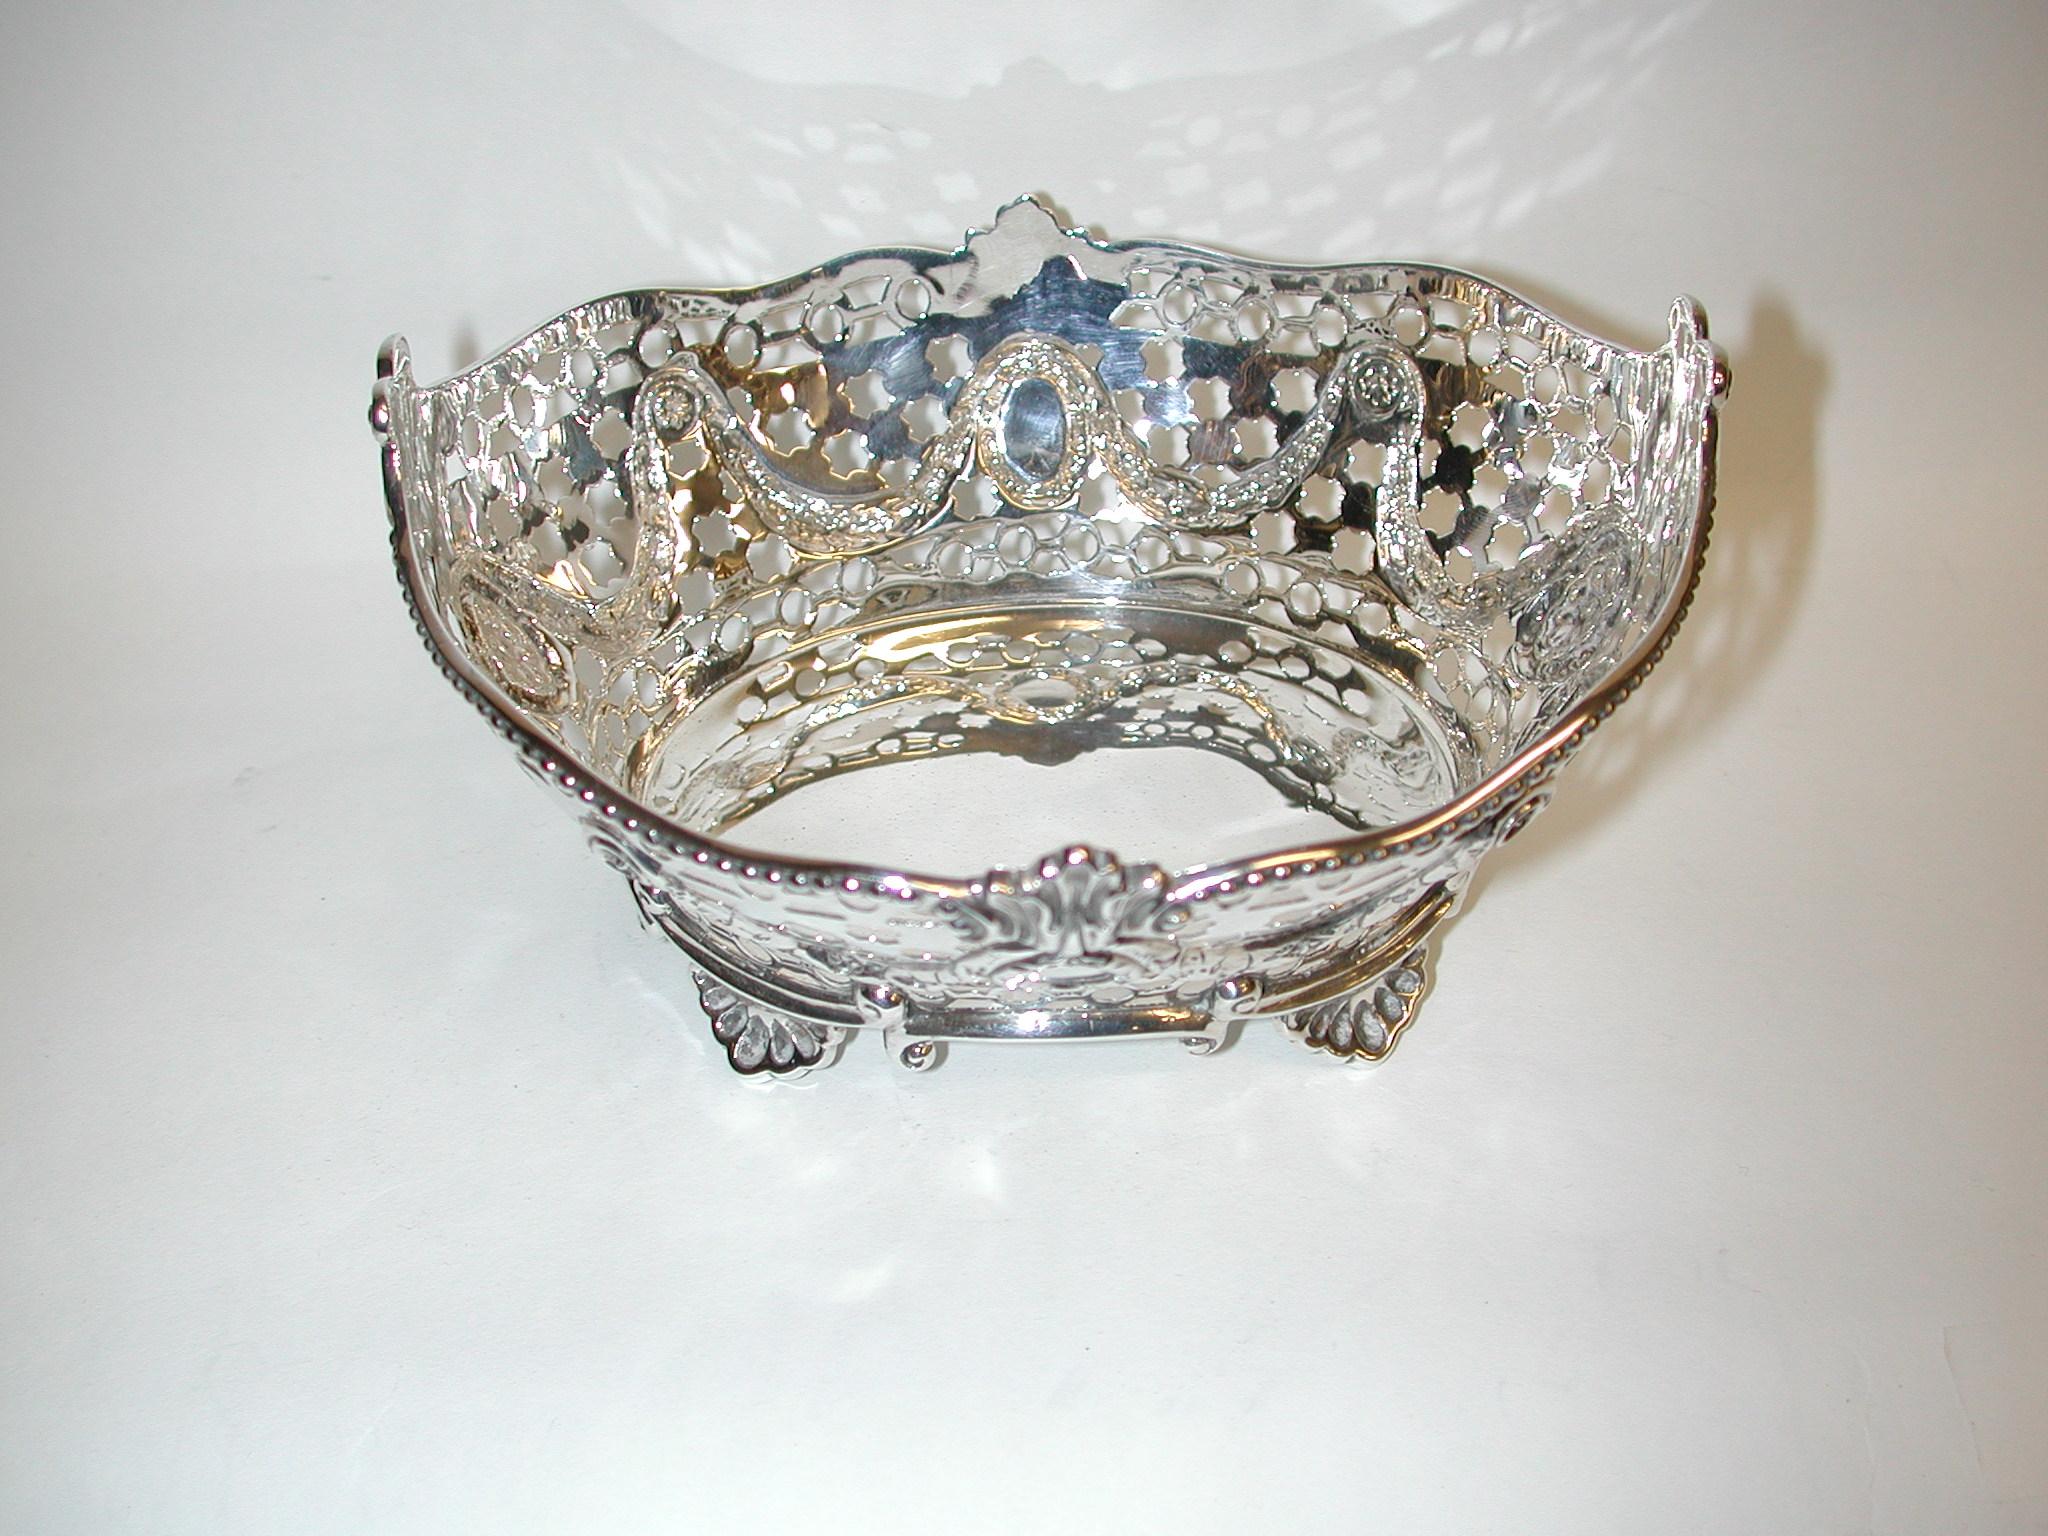 Victorian silver sweet dish, dated 1898, Assayed in London, Charles Stuart Harris
Beautiful silver sweet basket with hand-piercing and cast embossed borders.
   